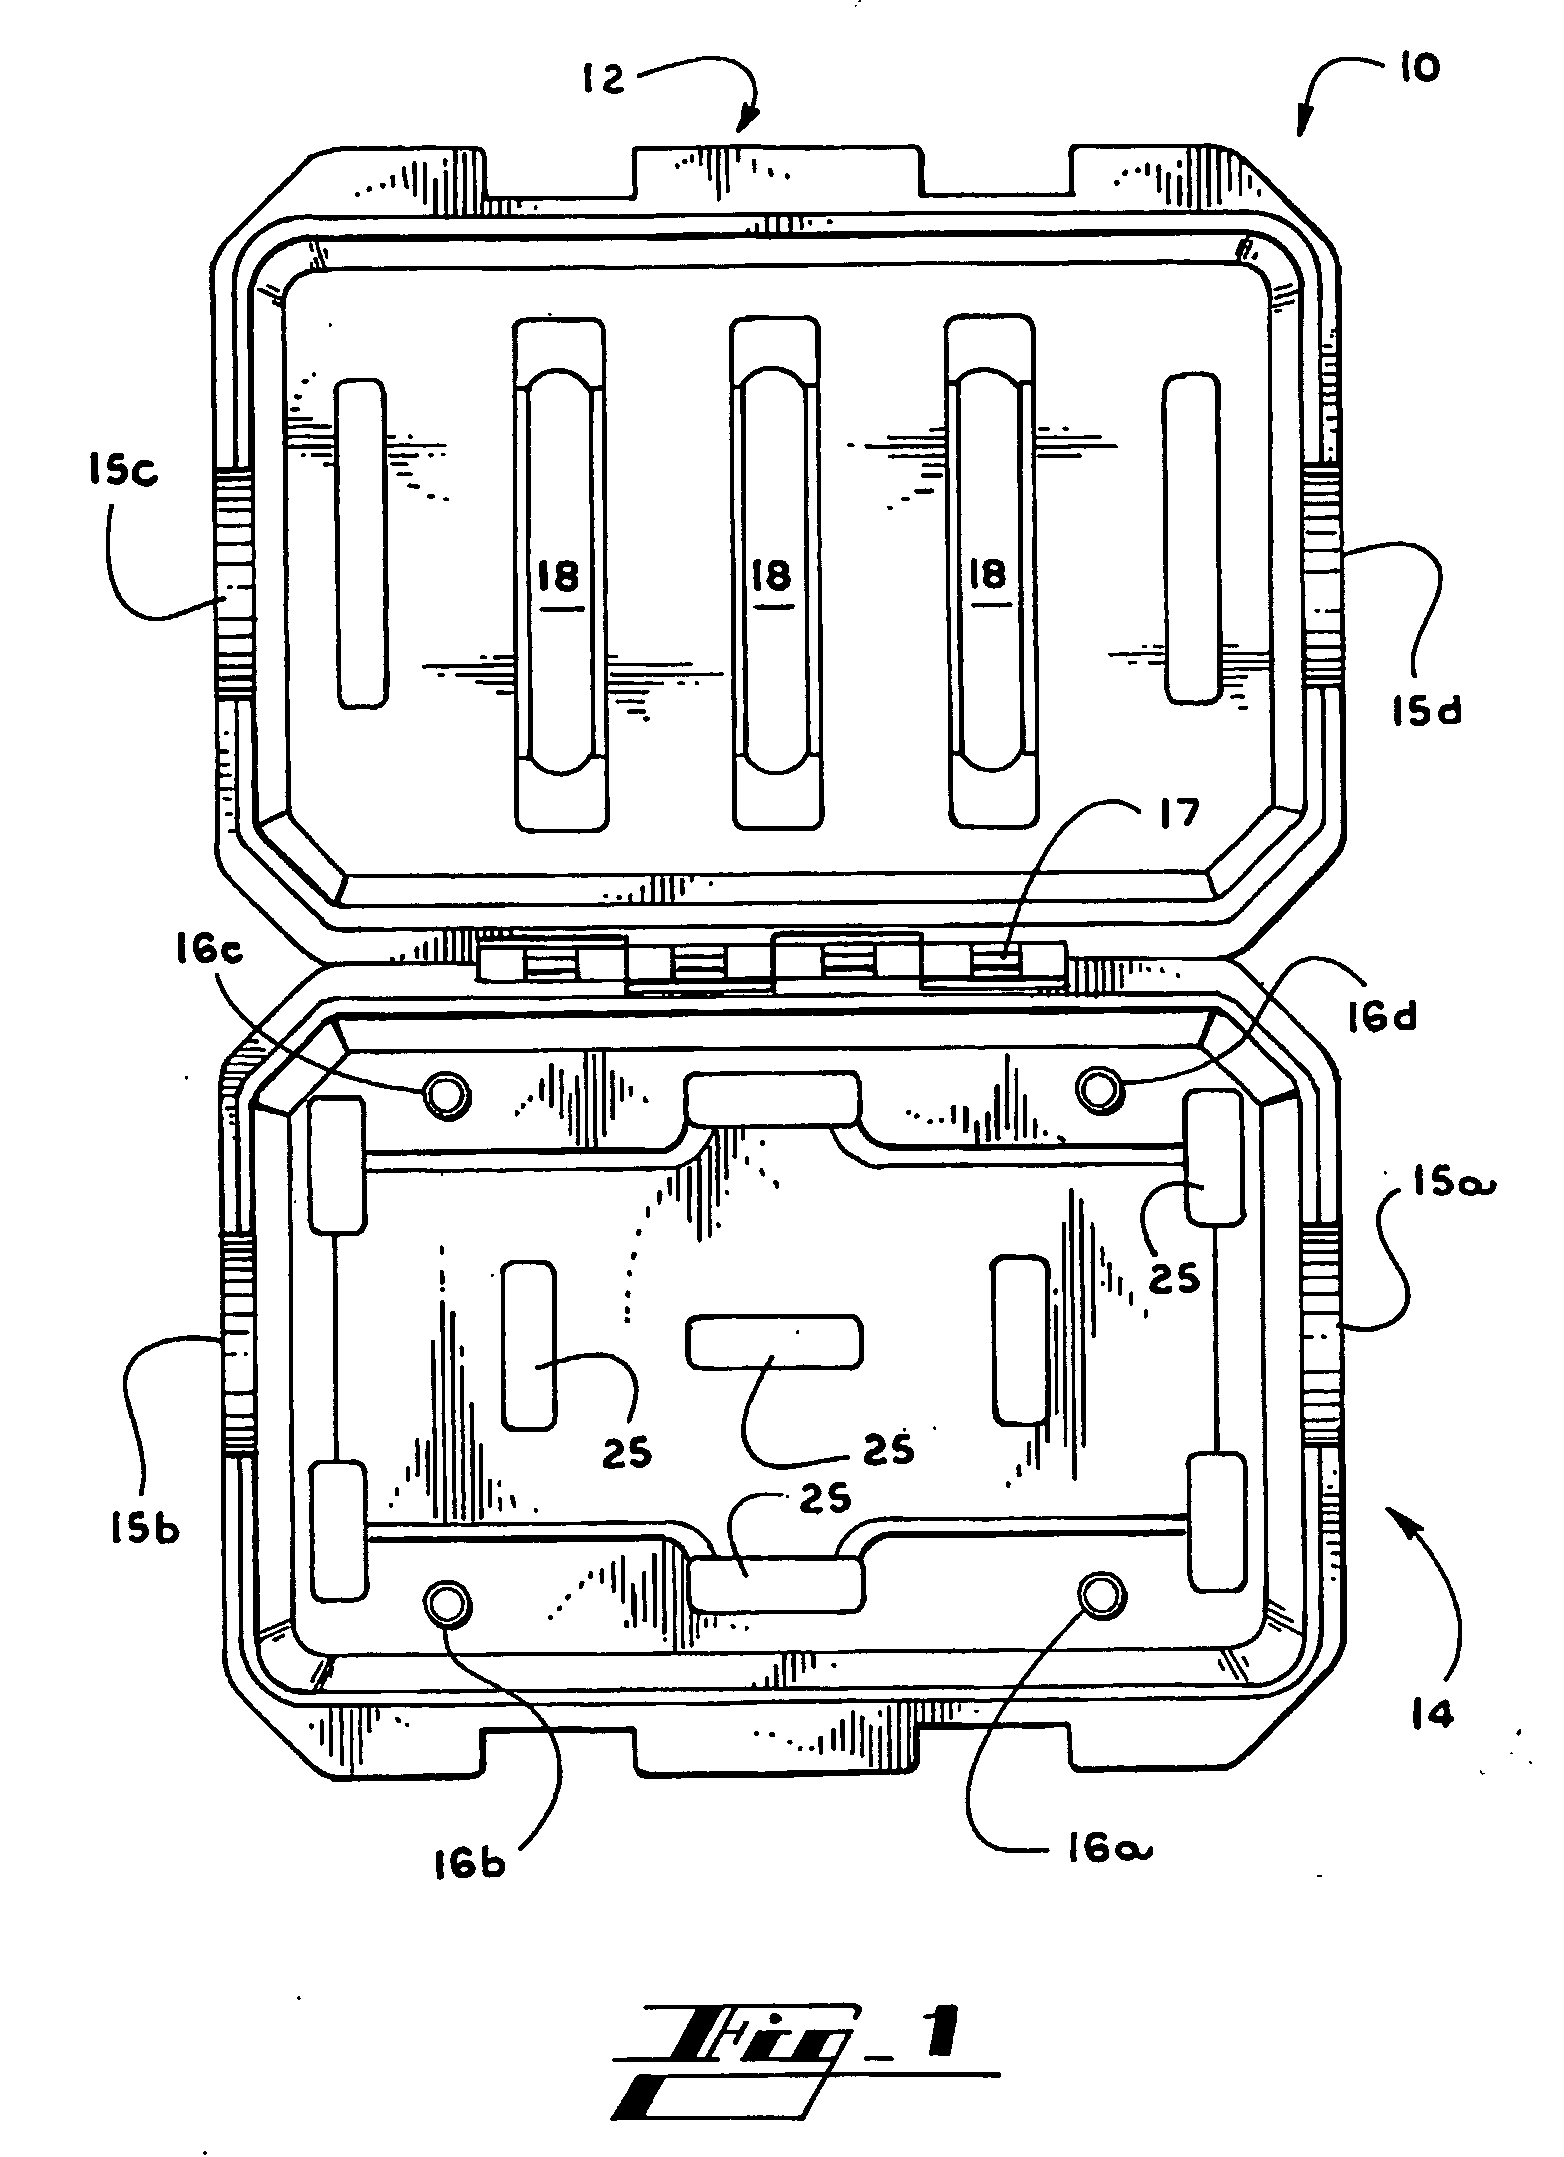 Method and apparatus for storing and protecting conduit